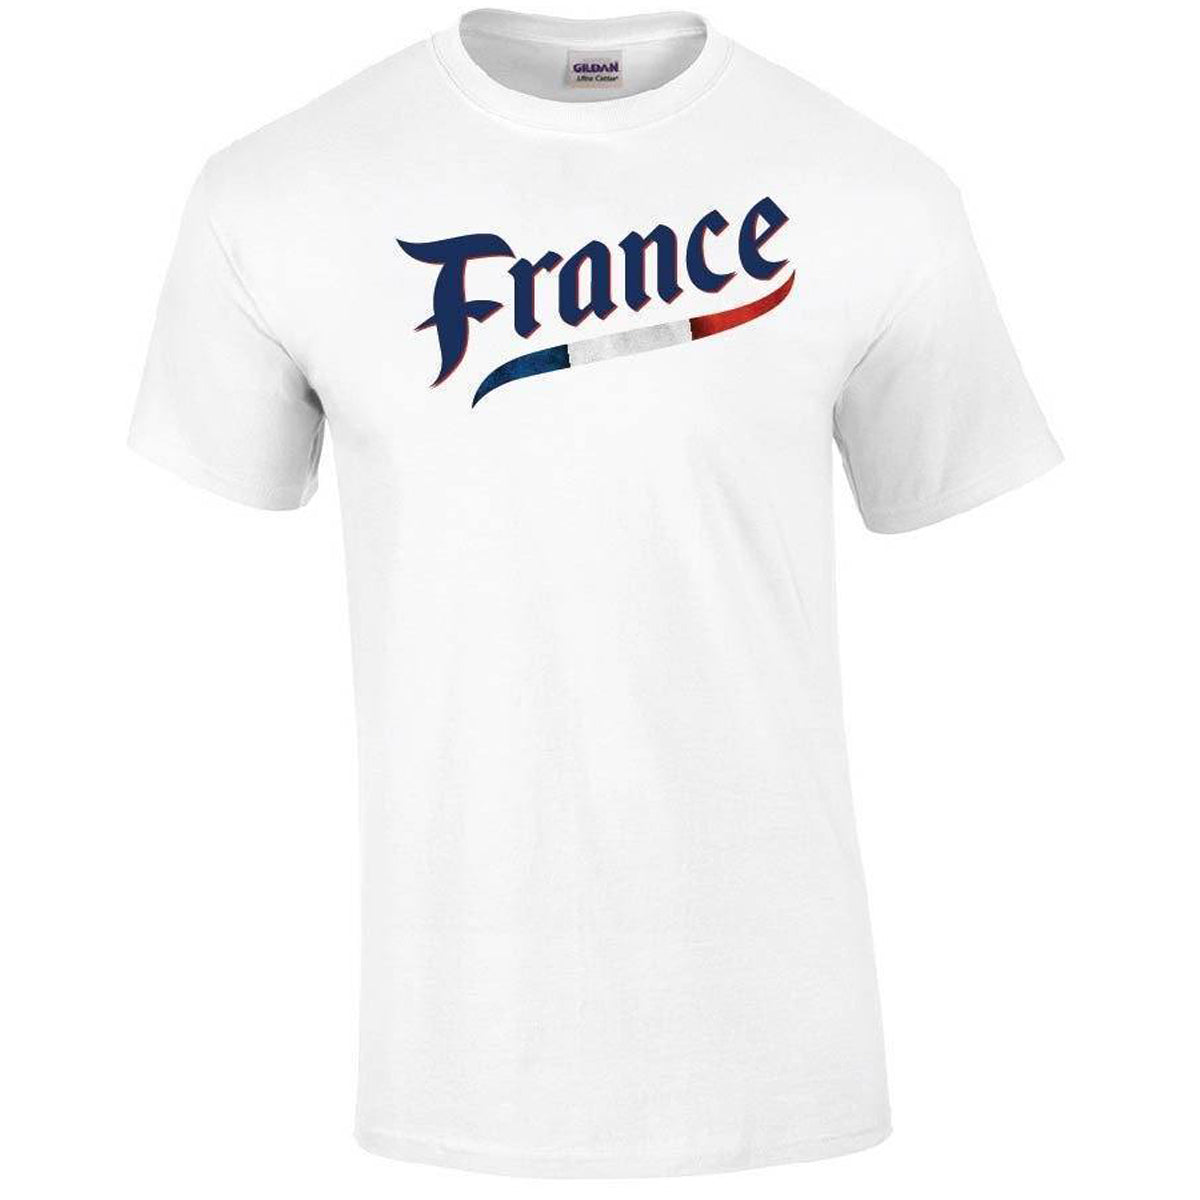 France Script World Cup 2022 Printed Tee T-shirts 411 Youth Medium White Youth